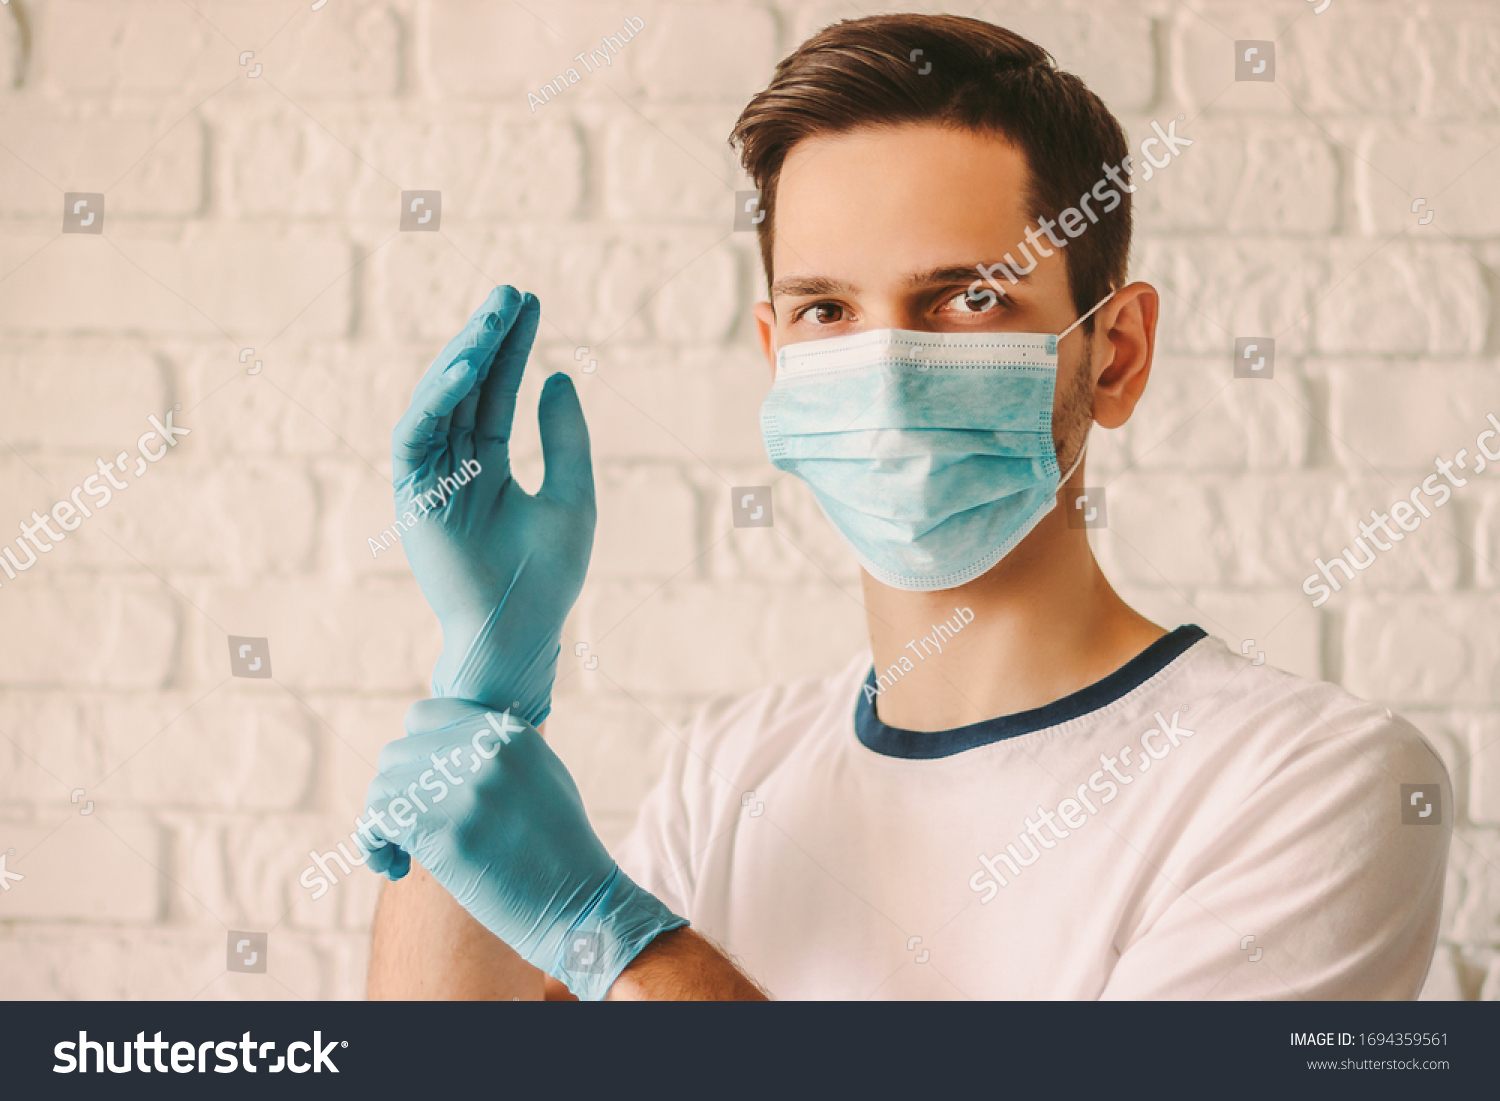 Confident man surgeon in medical mask on face wearing protective sterile glove on hand. Professional doctor in protective face mask putting on latex glove on hand. Coronavirus COVID-19. Hospital staff #1694359561